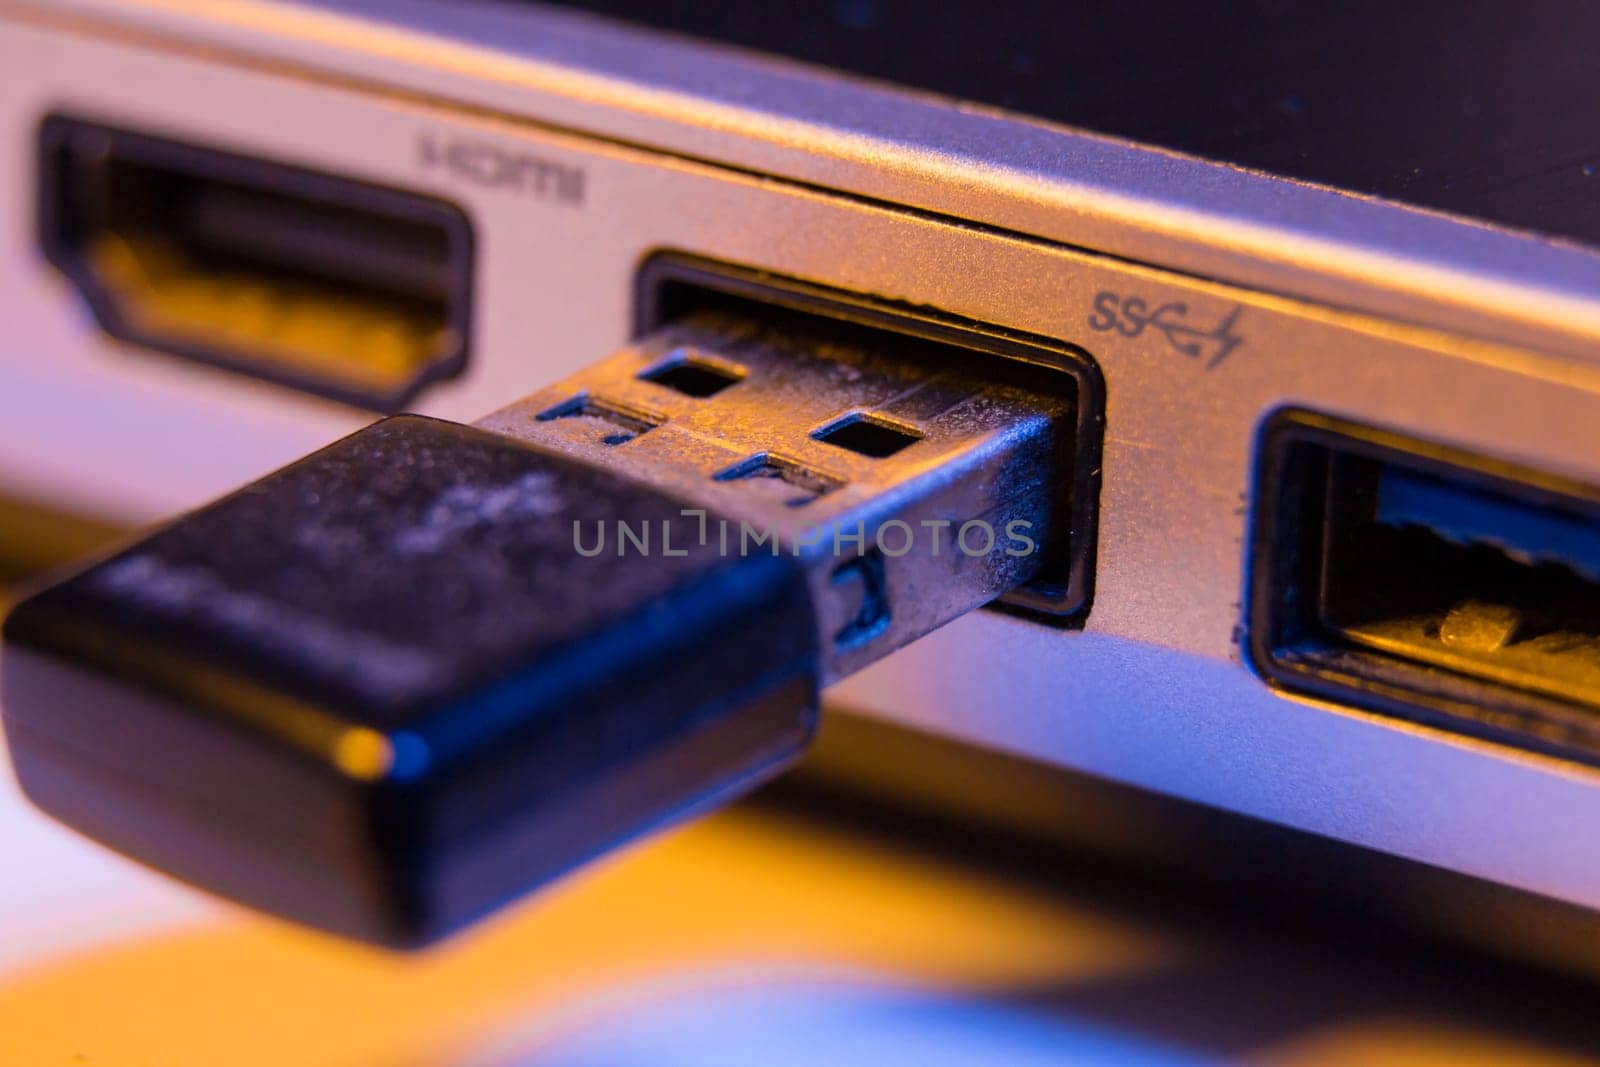 Closeup of USB flash drive inserted into port on the side of a laptop by wavemovies